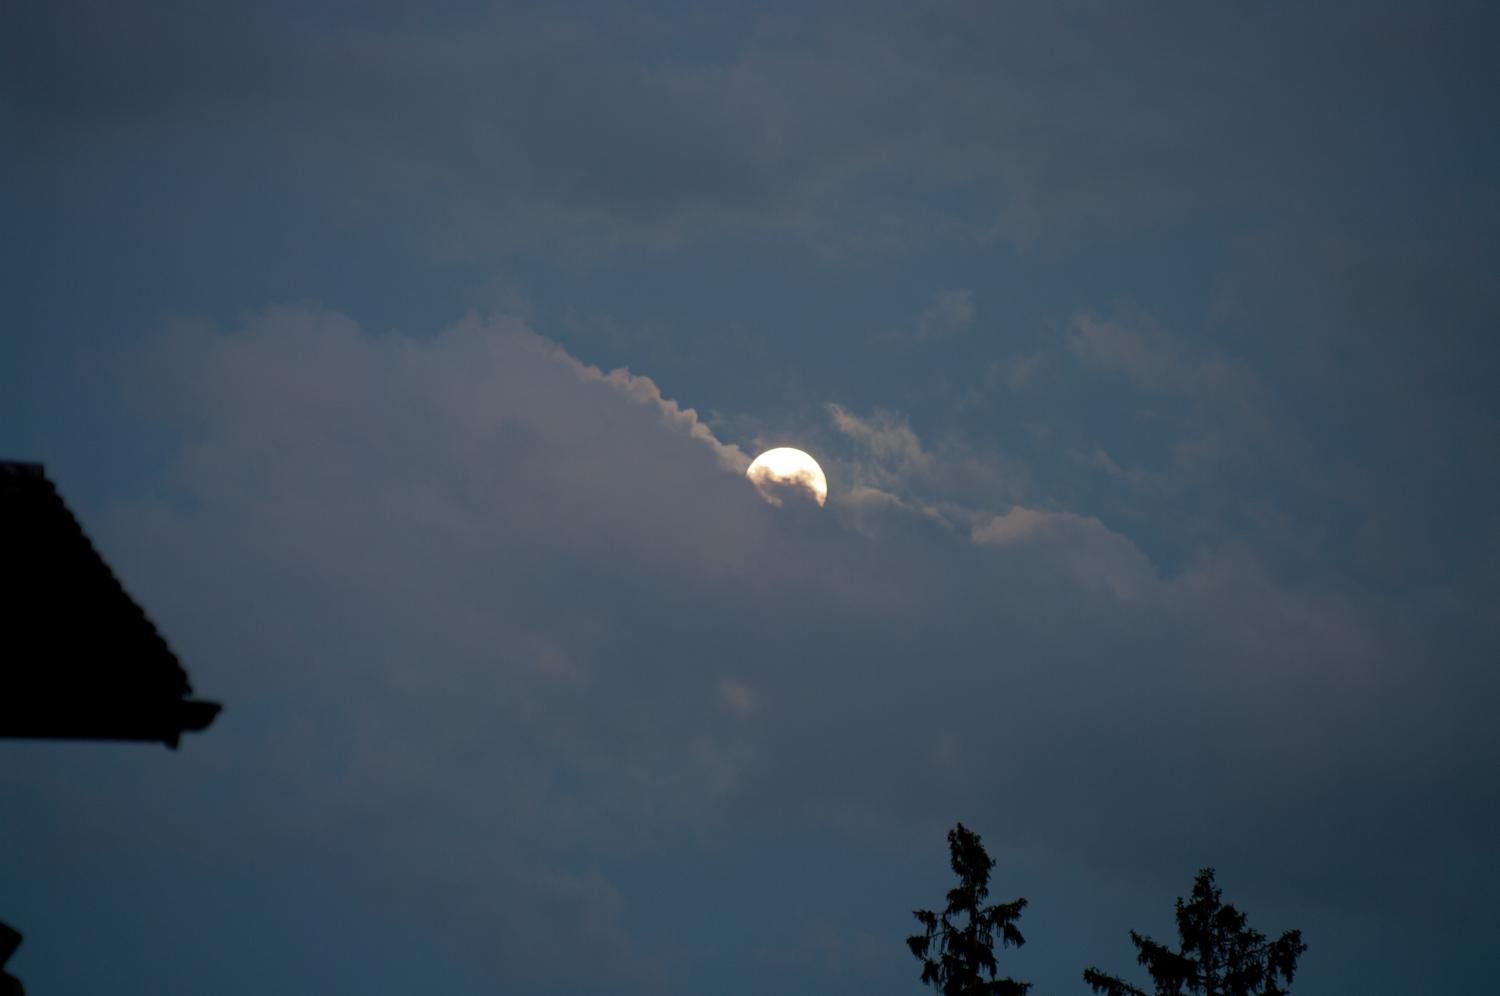 Moon through the clouds